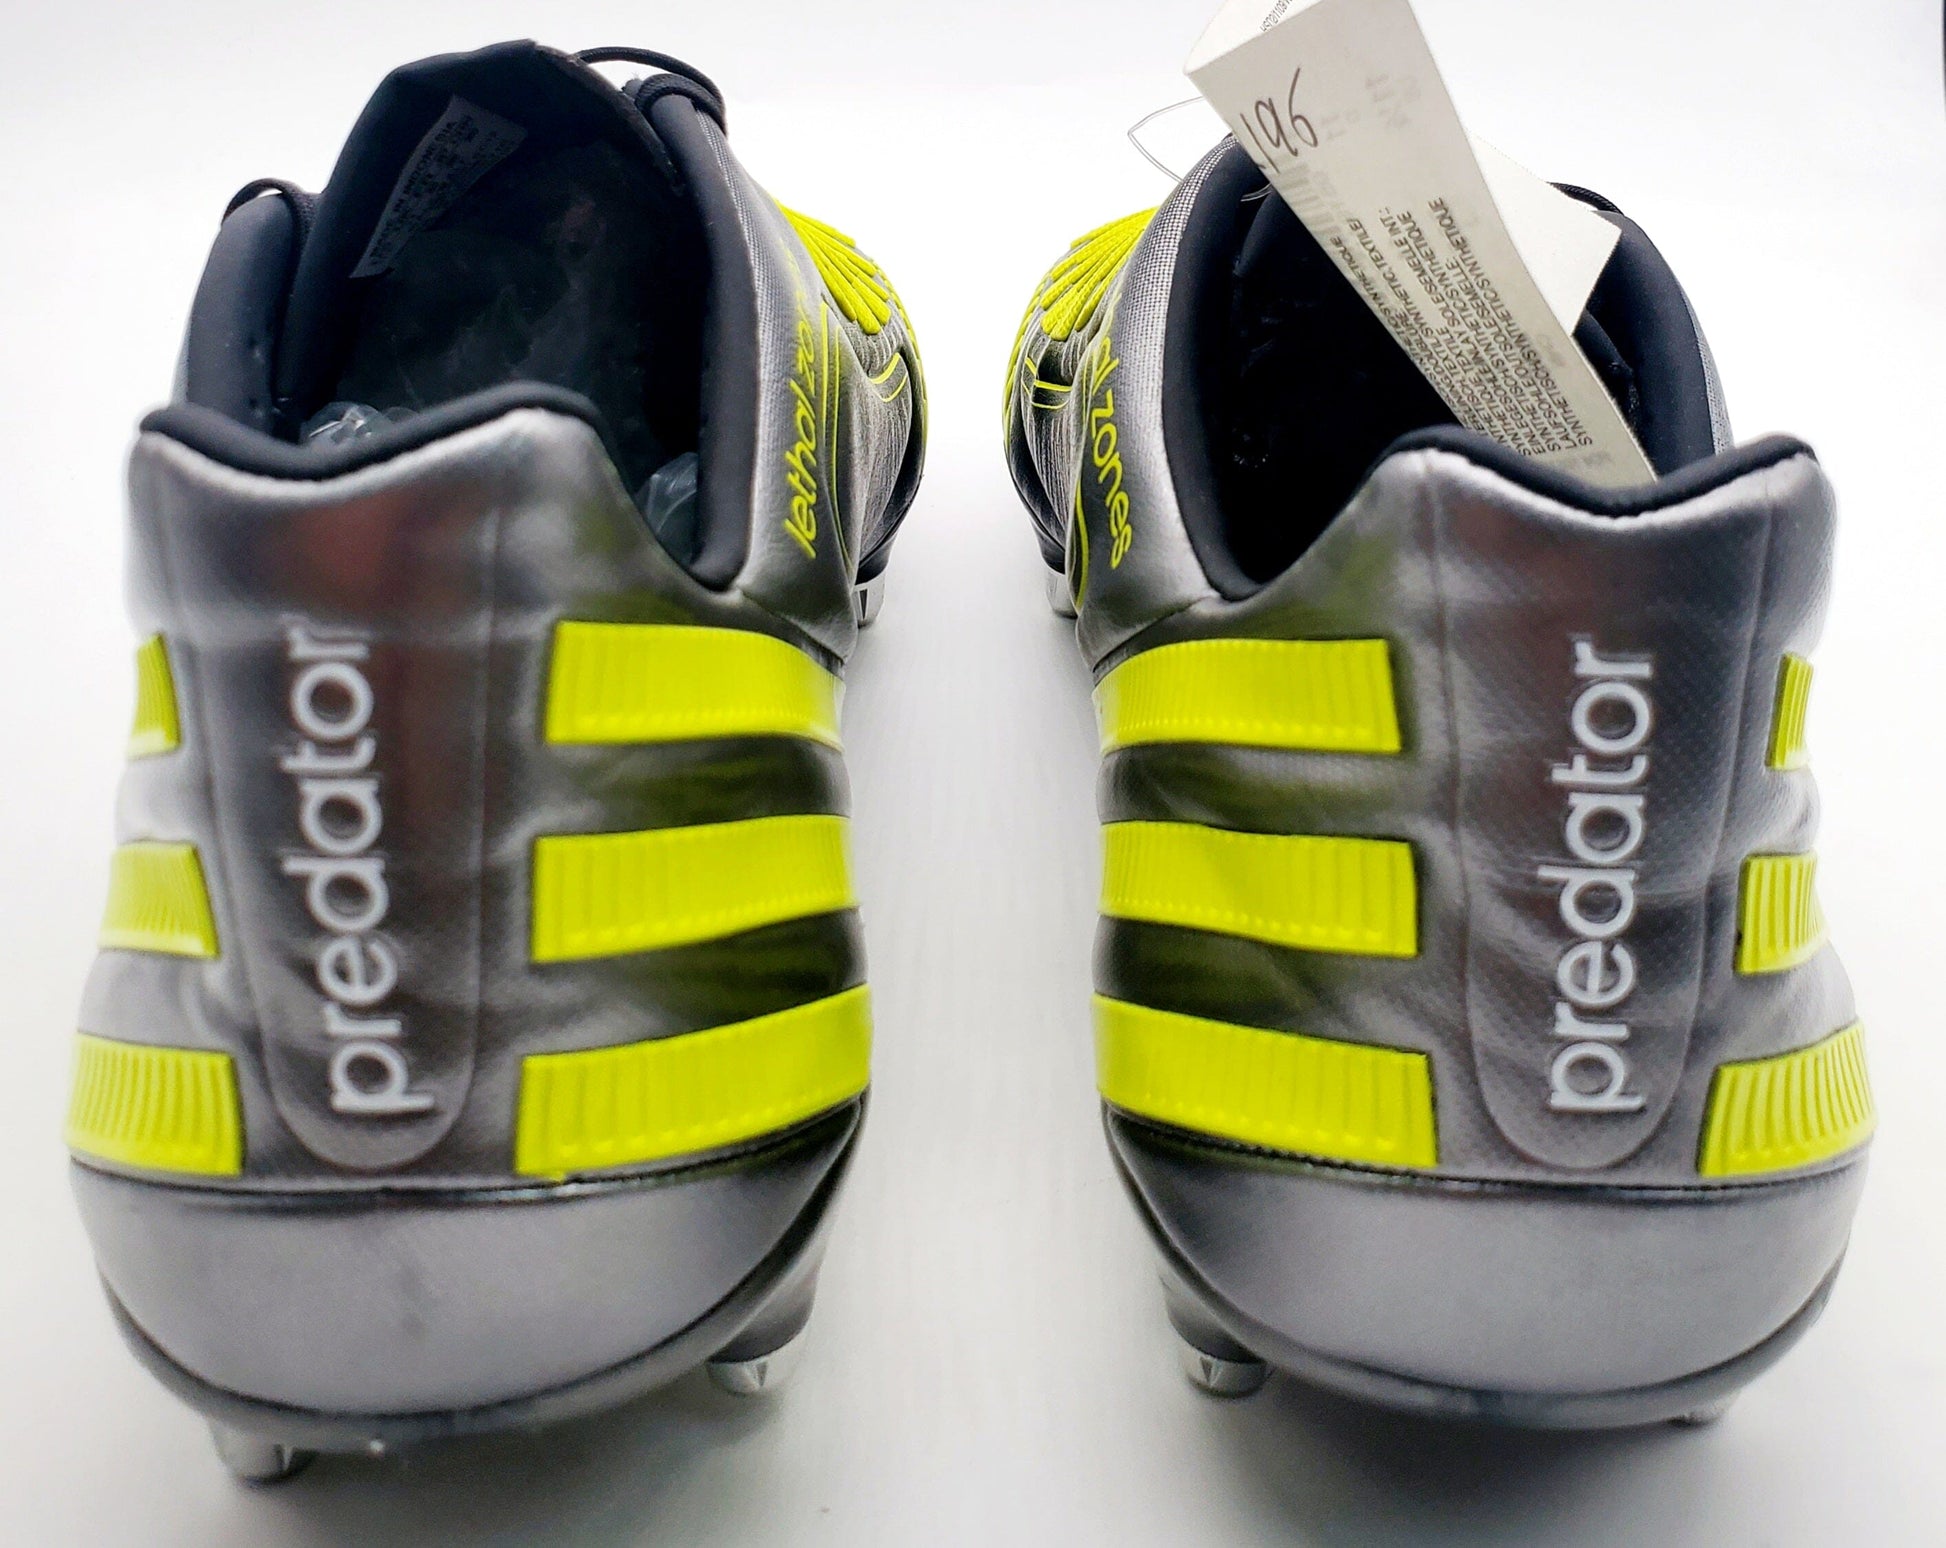 Under_Score_Soccer - Adidas Predator Lethal Zones FG - Vivid  Yellow/Black/Vivid Berry/White Size - UK 7.5 More pictures and info  available on request Just comment or inbox me